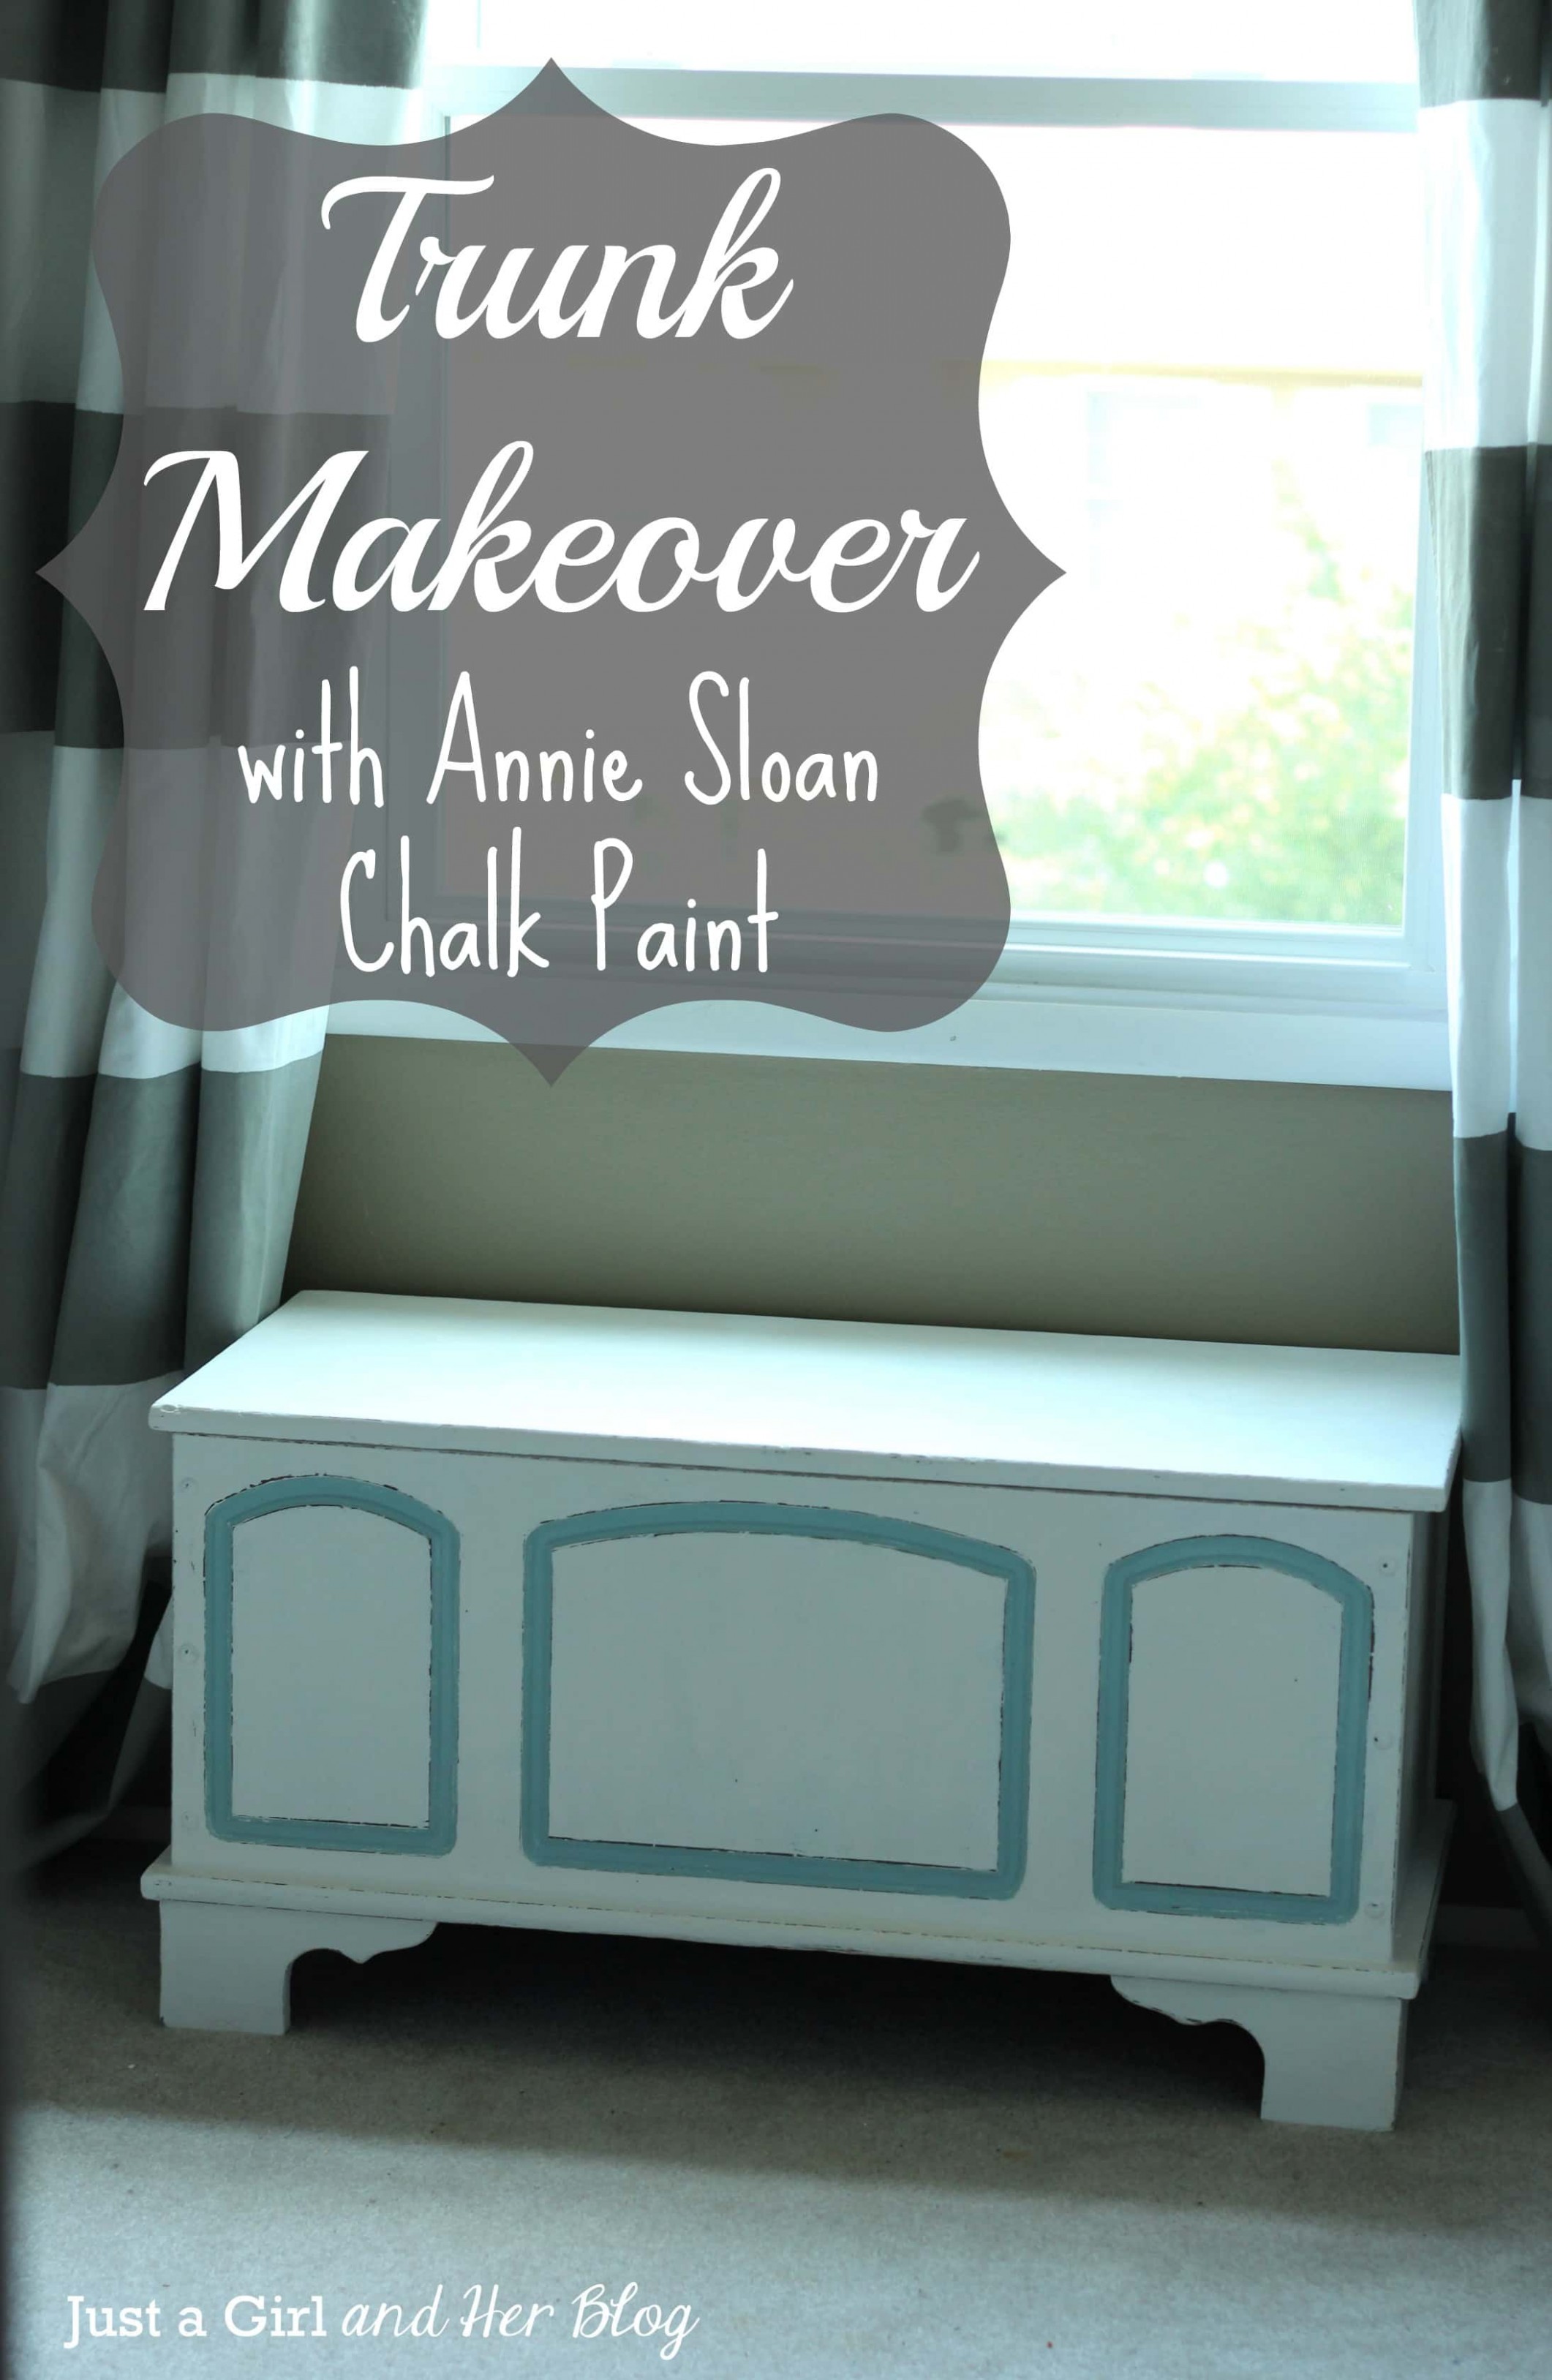 Trunk Makeover With Annie Sloan Chalk Paint | Abby Lawson Chalk Paint Nearby